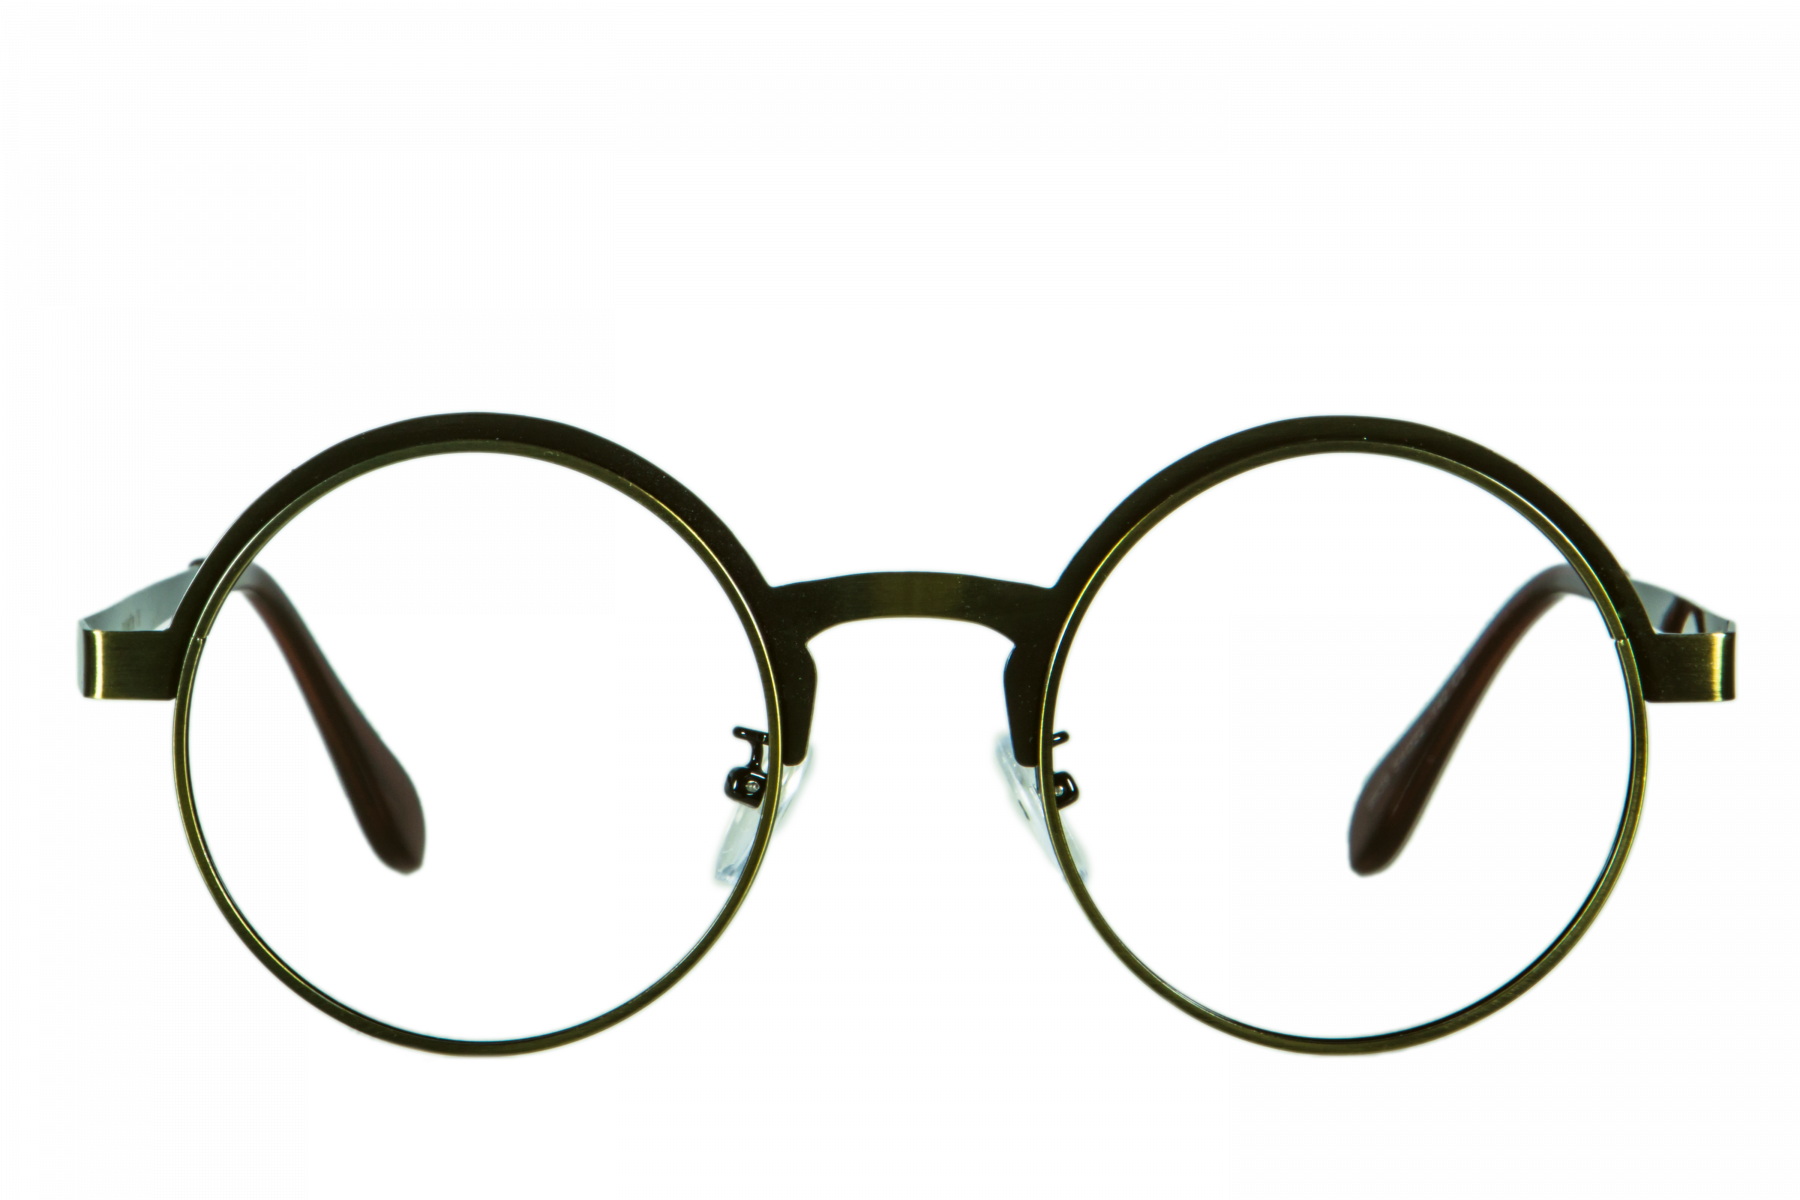 Aesthetic Circle Glasses Png Largest Wallpaper Portal